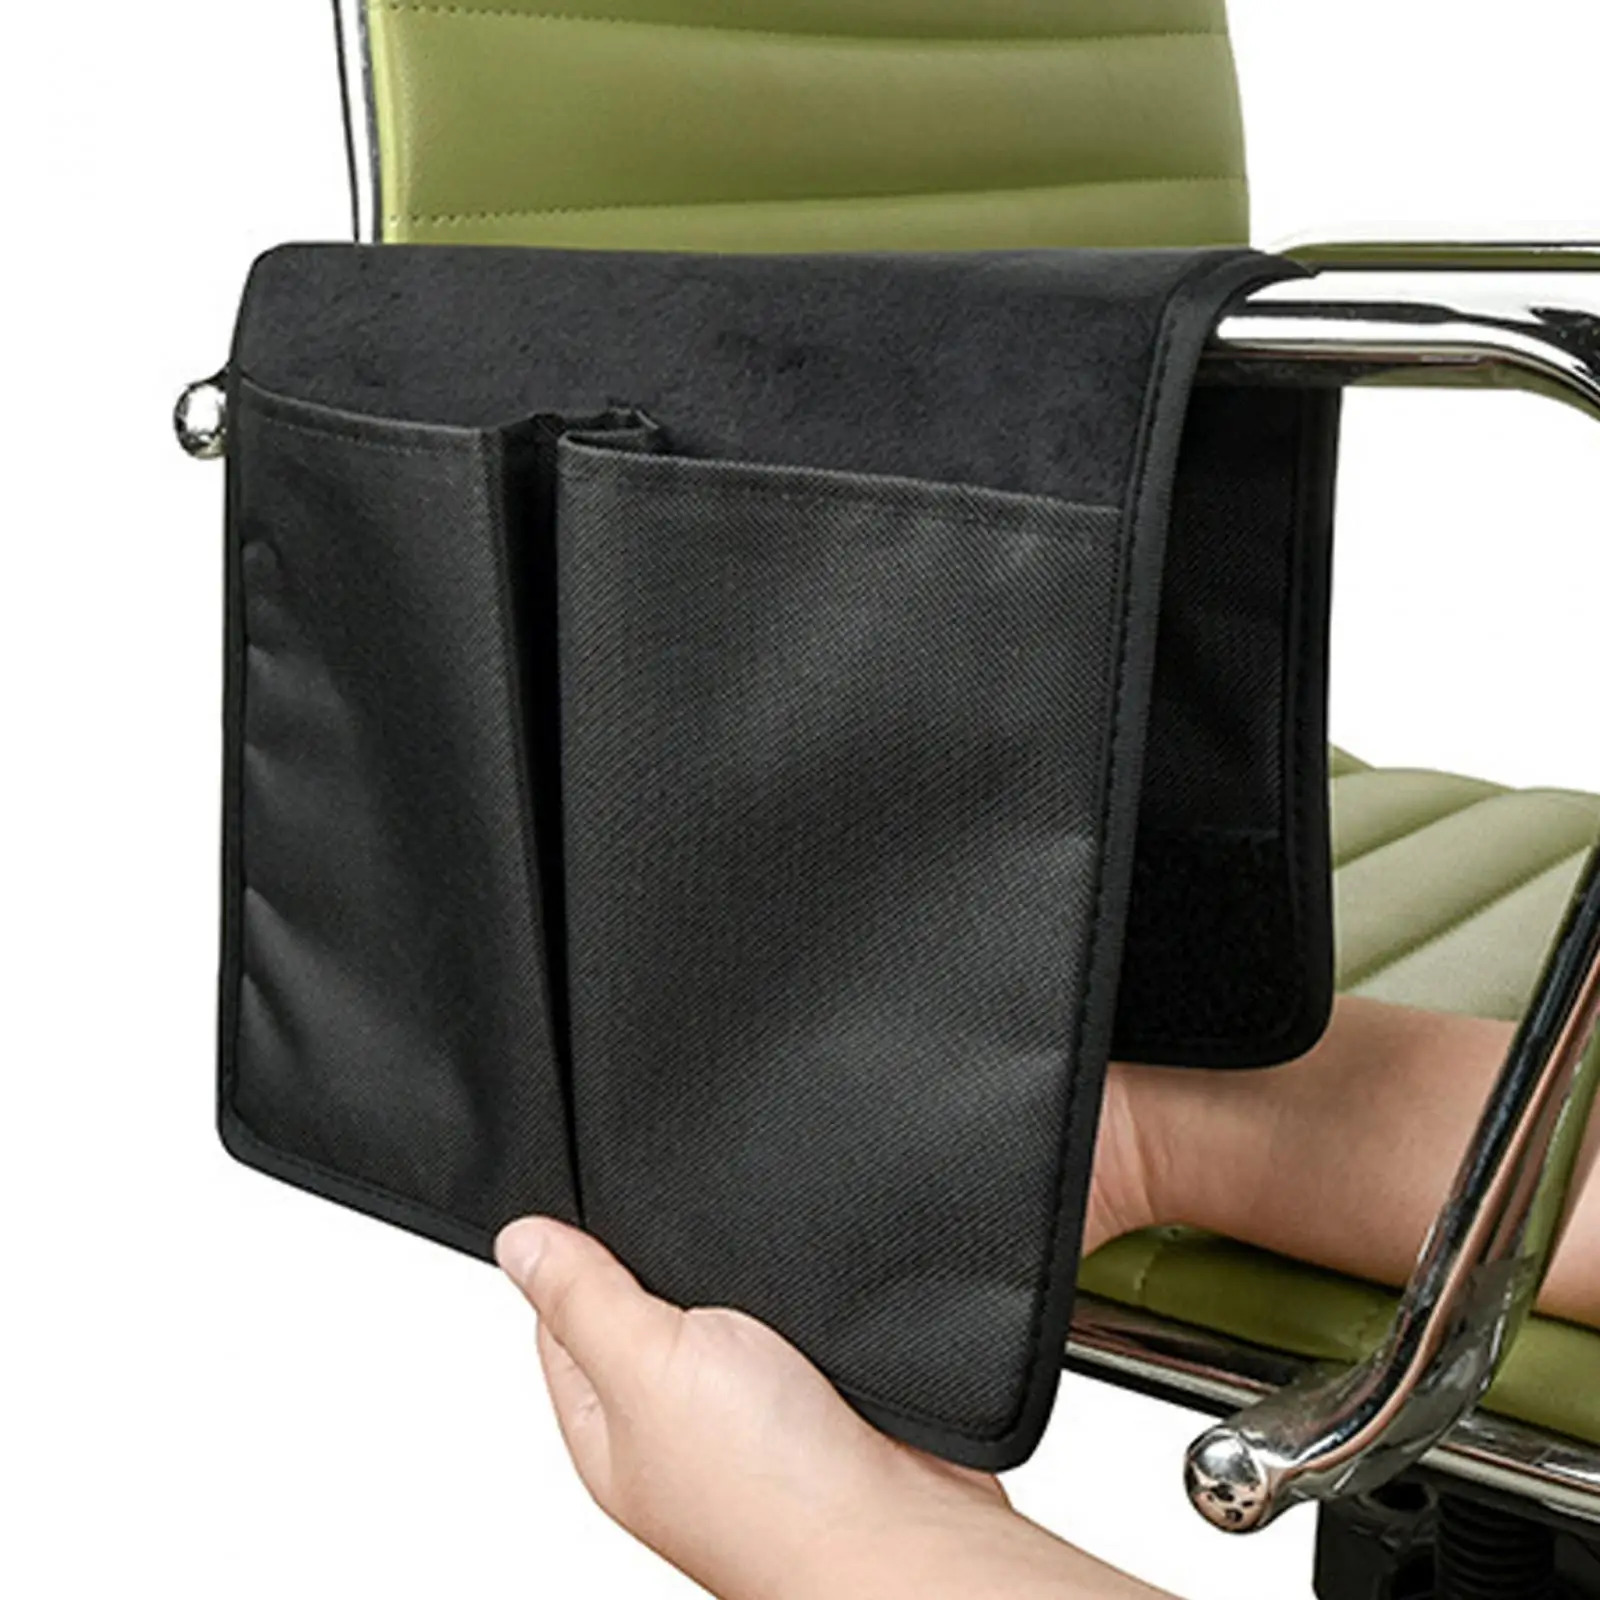 Chair Side Bag Accessories Bag Wheelchair Side Pouch for Pen Glasses Phone